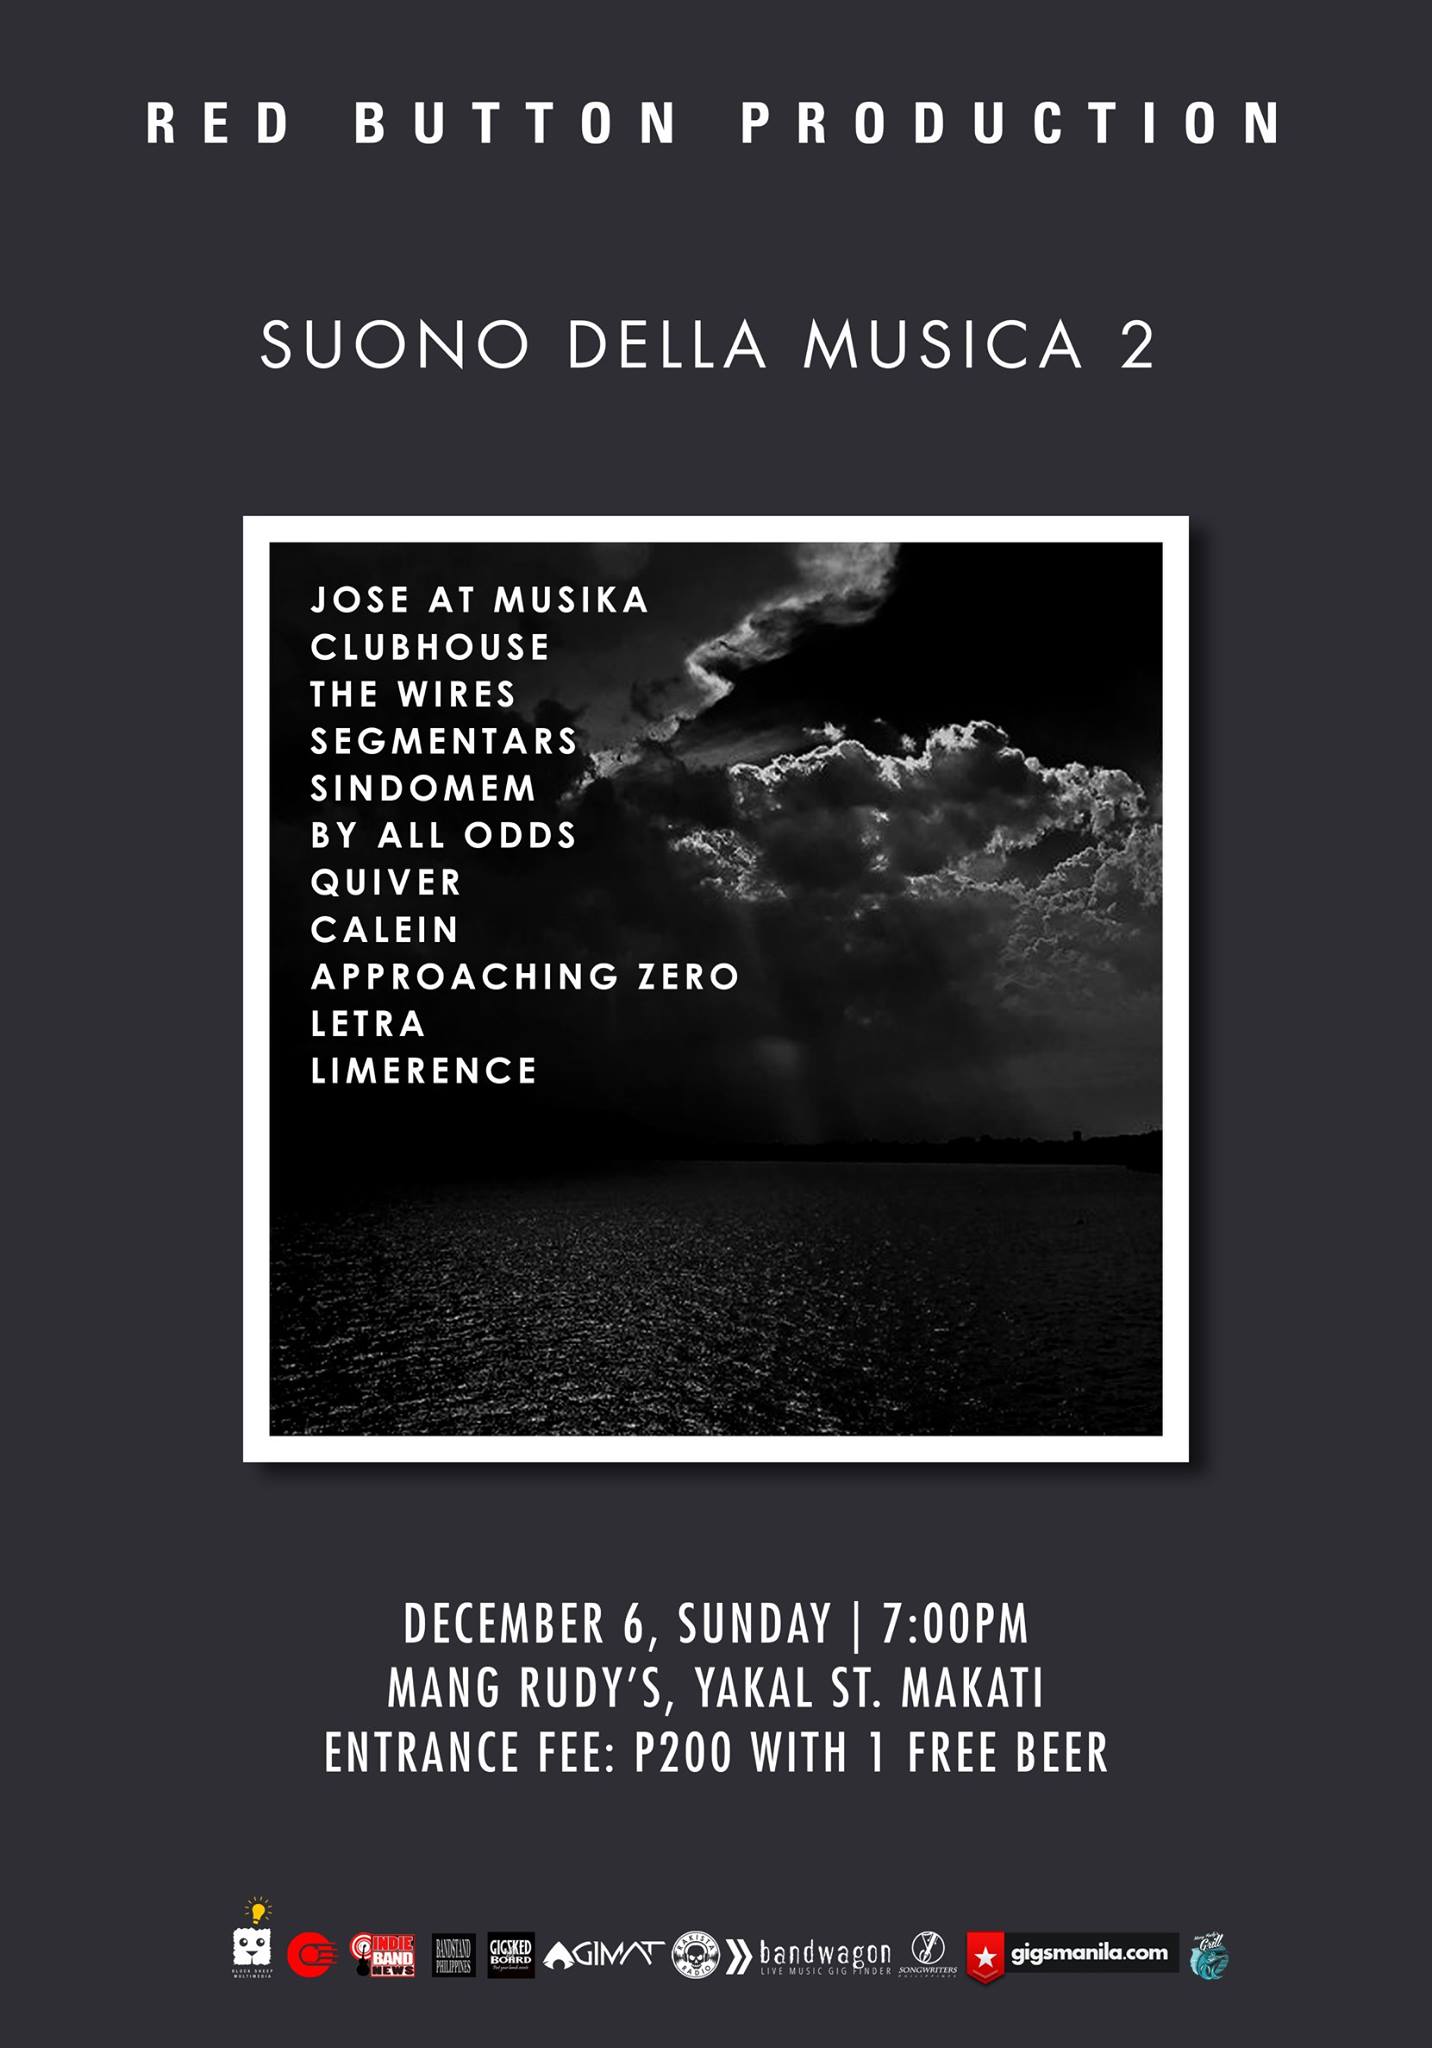 Red Button Production "SUONO DELLA MUSICA 2" Sunday, December 6 at 7:00pm - 2:00am Dec 6 at 7:00pm to Dec 7 at 2:00am pin Show Map Mang Rudy's Tuna Grill And Papaitan 148 A Yakal Street San Antonio Village, 1230 Makati, Philippines Red Button Production "SUONO DELLA MUSICA 2" December 6, Sunday - 7PM Mang Rudy's, Yakal St. Makati Entrance Fee: 200 with Beer *still open for band line-up performaces by: Jose at Musika Clubhouse The Wires Segmentars Sindomem By All Odds Quiver Calein Approaching Zero Letra Limerence